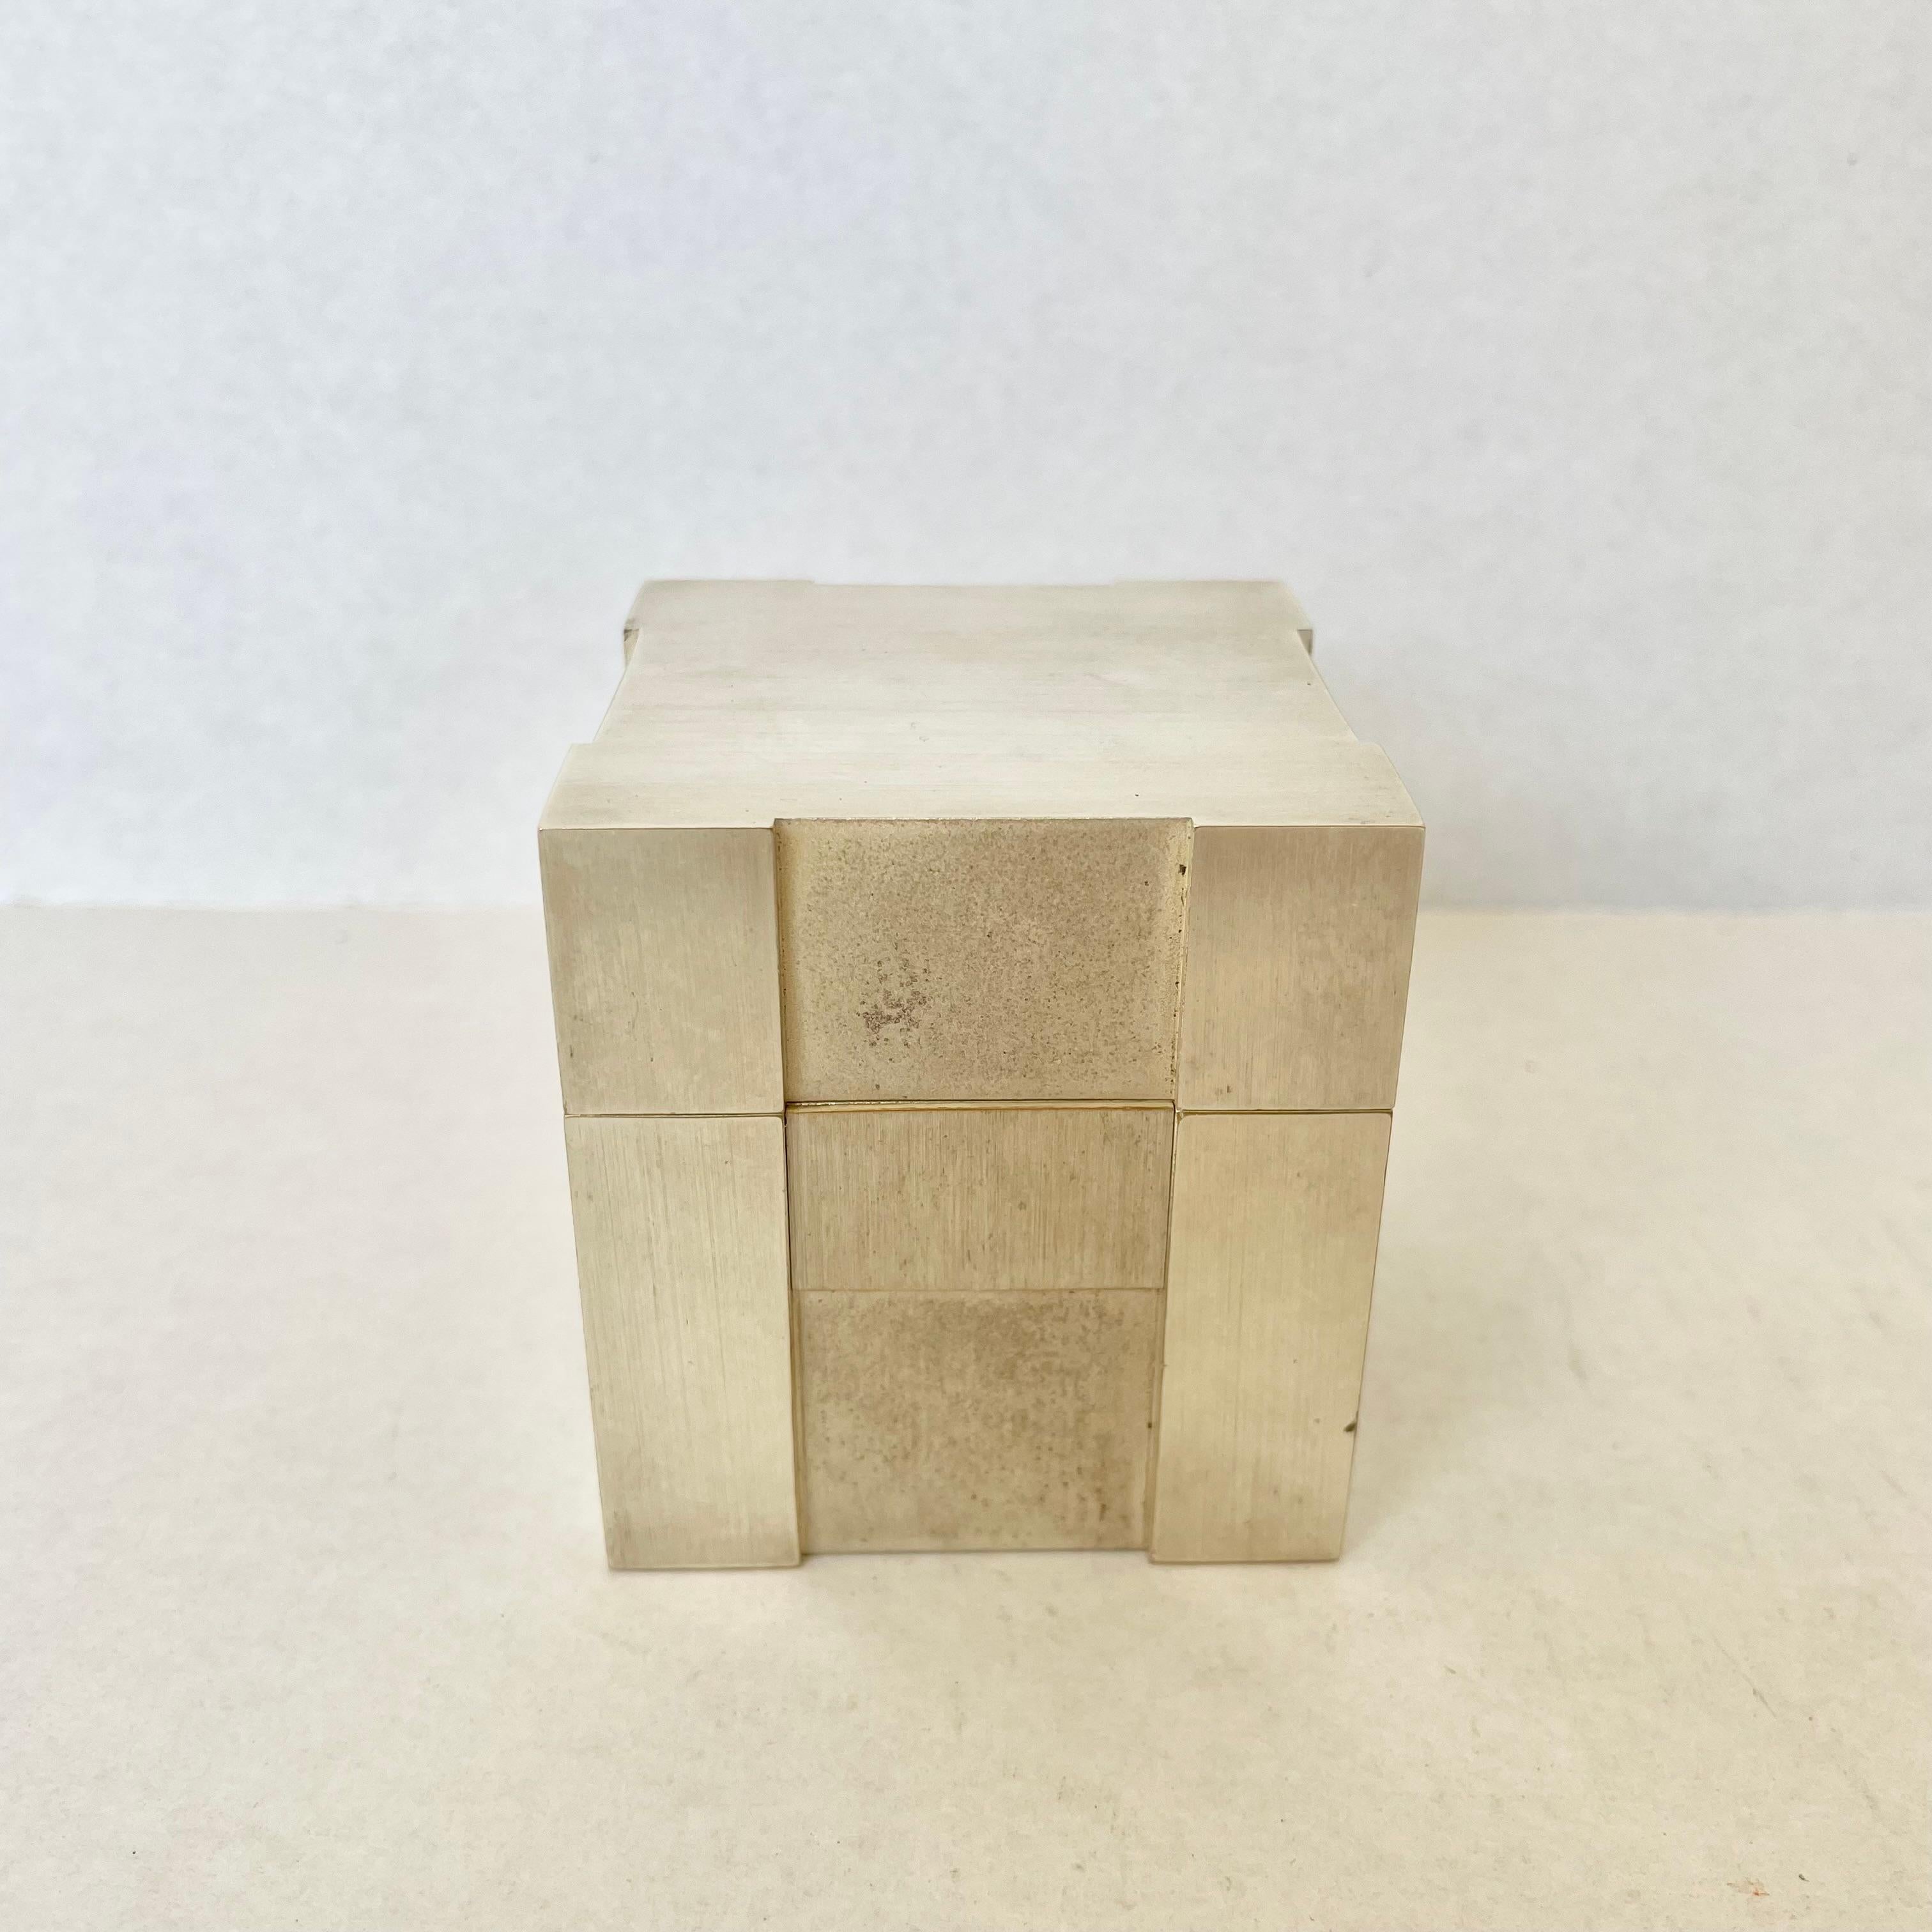 Magnificent cube lighter by Hermes, Paris, circa 1960s France. Hermes H displayed on all 4 sides. Silver plated. Stamped Hermes, Paris underneath. Heavy and substantial piece. Lots of presence. Perfect on a desktop or bar. Working lighter.
 